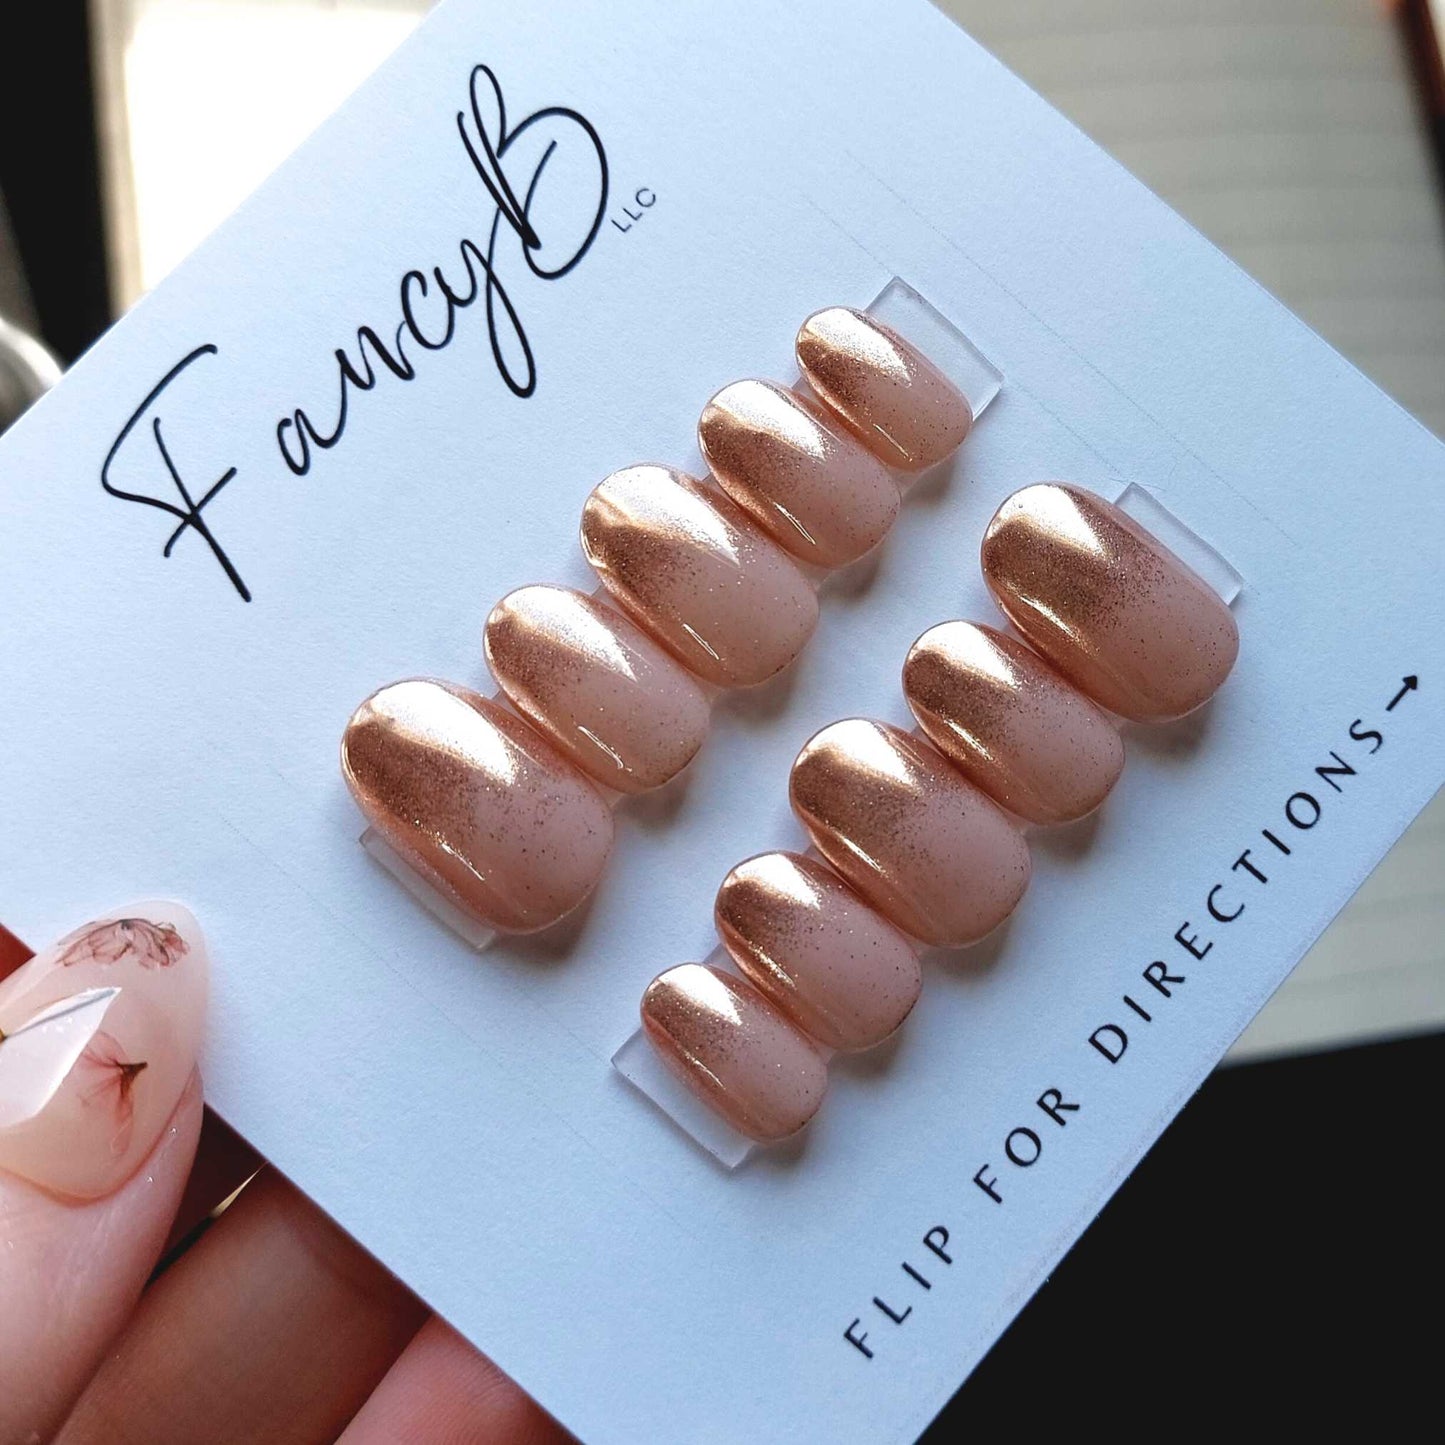 Rose gold chrome ombre nails in short oval